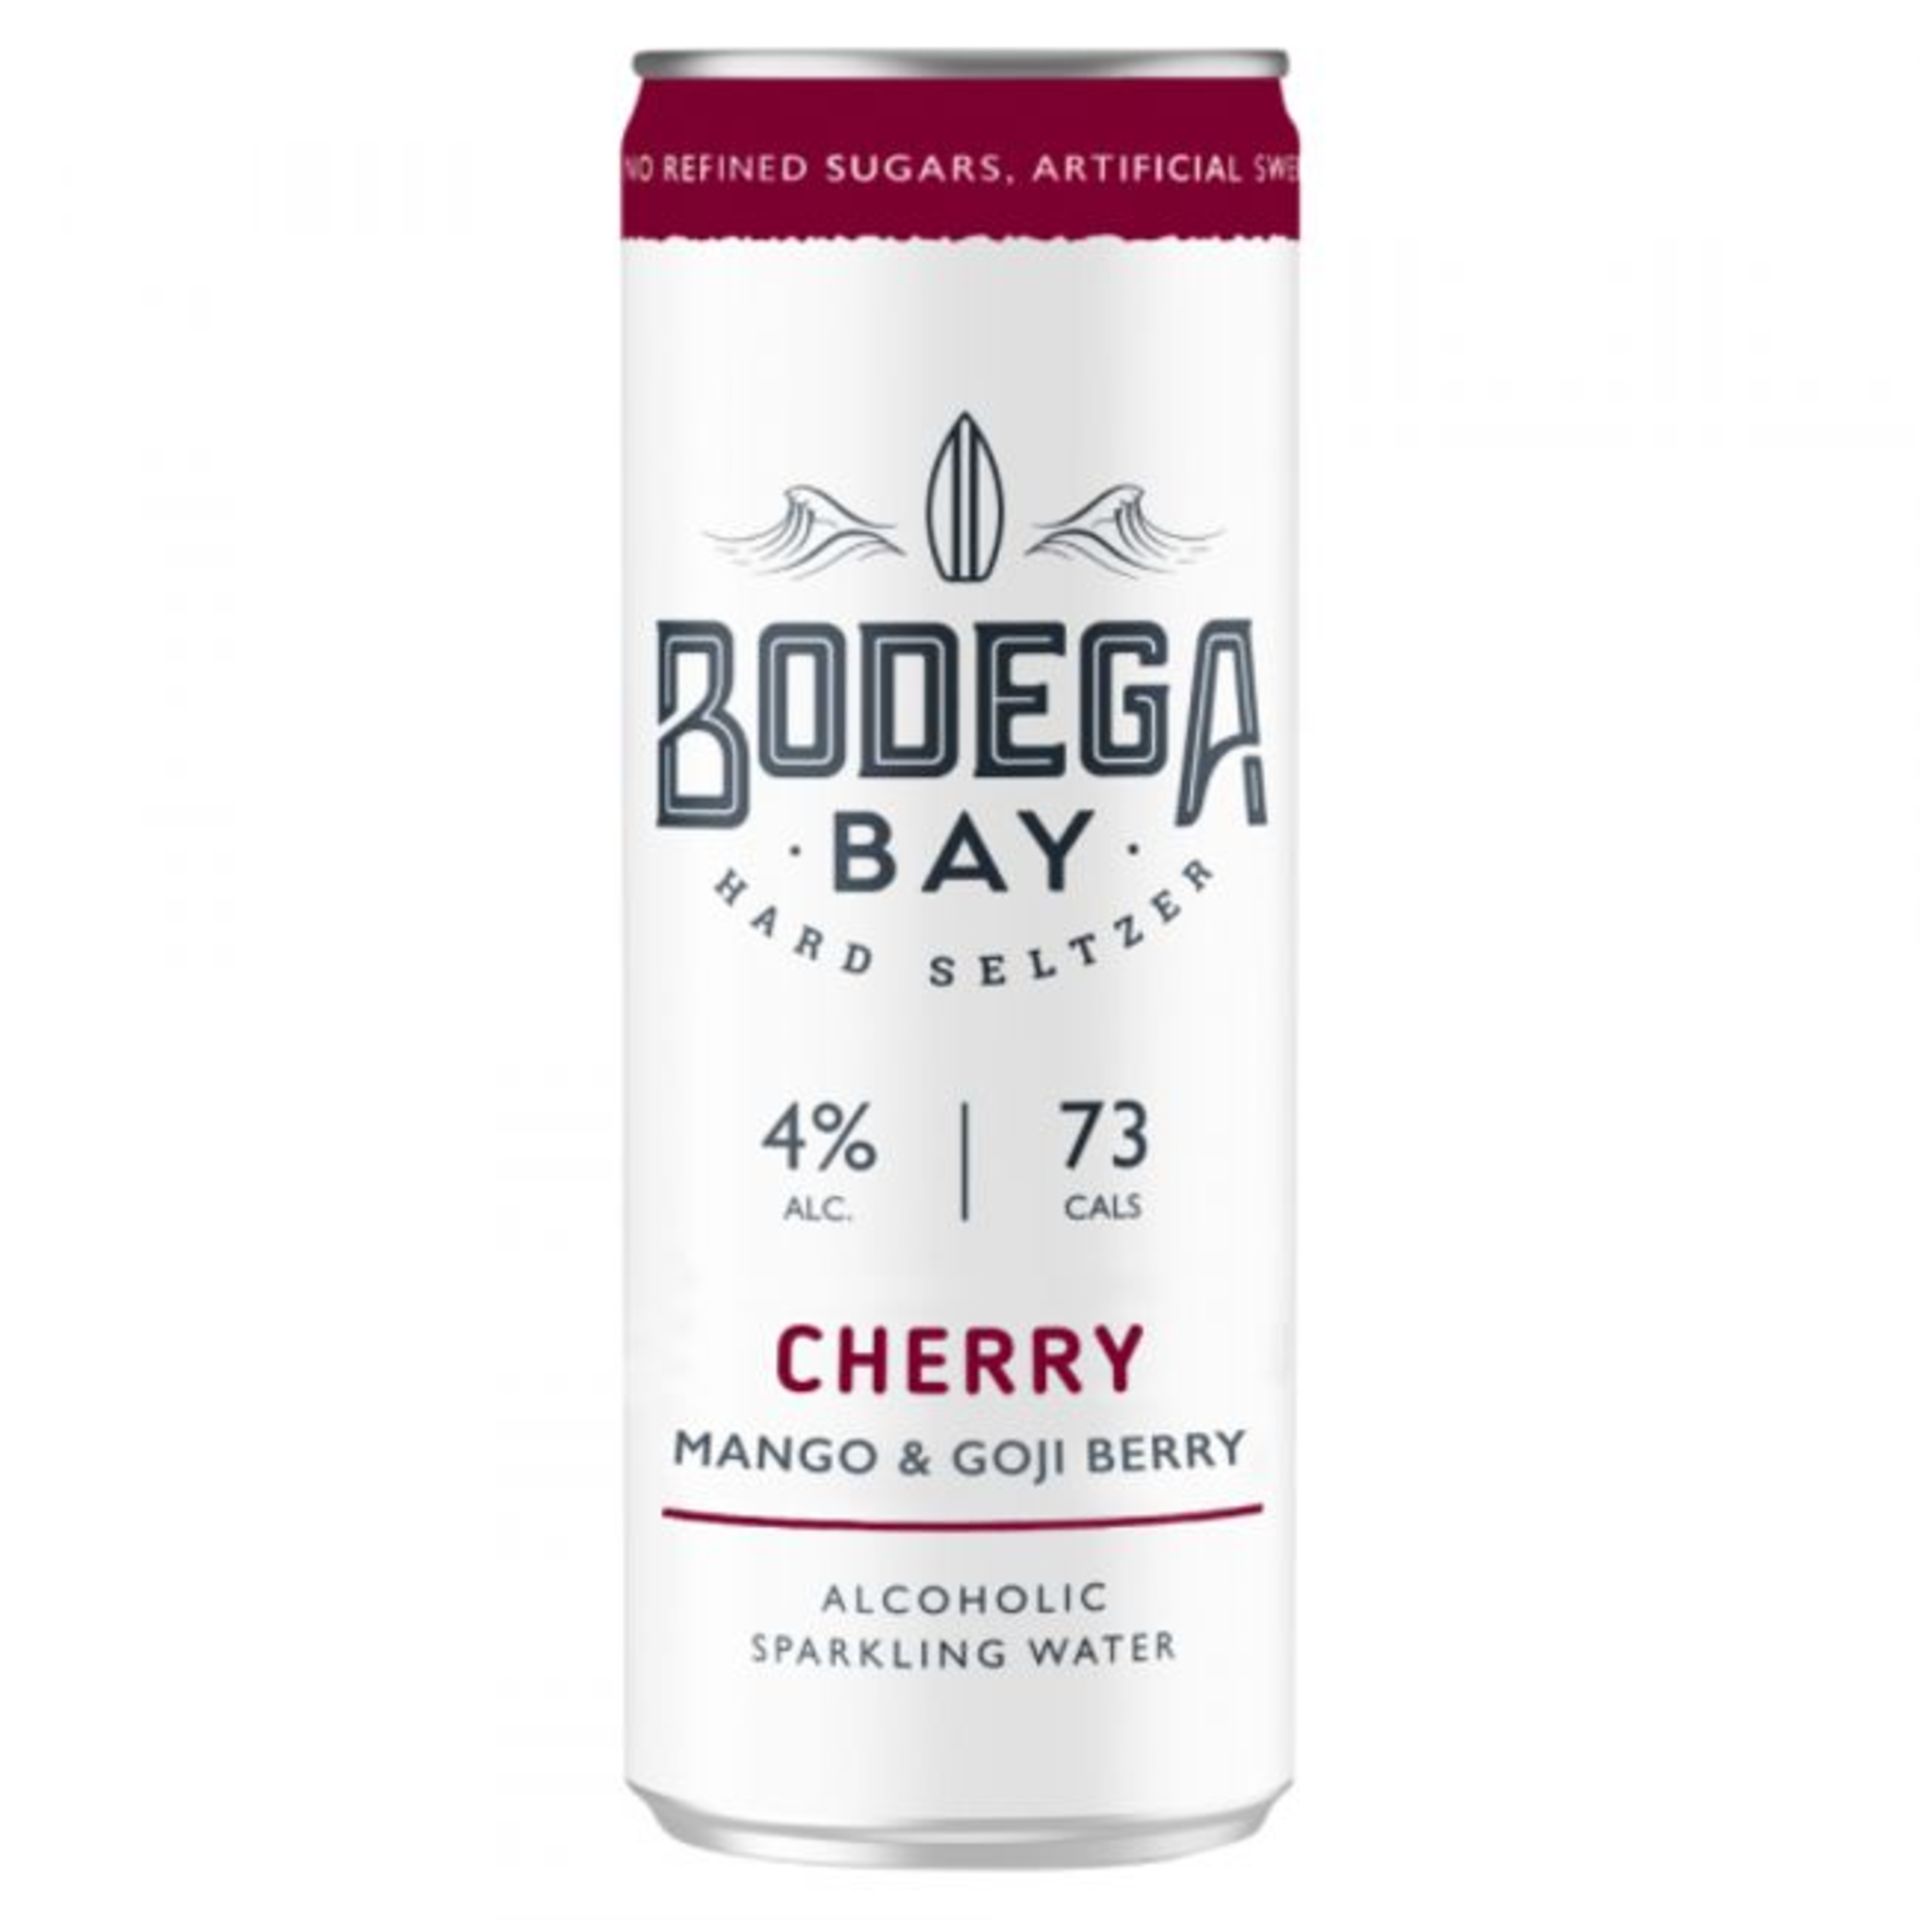 1,080 x Cans of Bodega Bay Hard Seltzer 250ml Alcoholic Sparkling Water Drinks - RESALE JOB LOT - Image 9 of 21